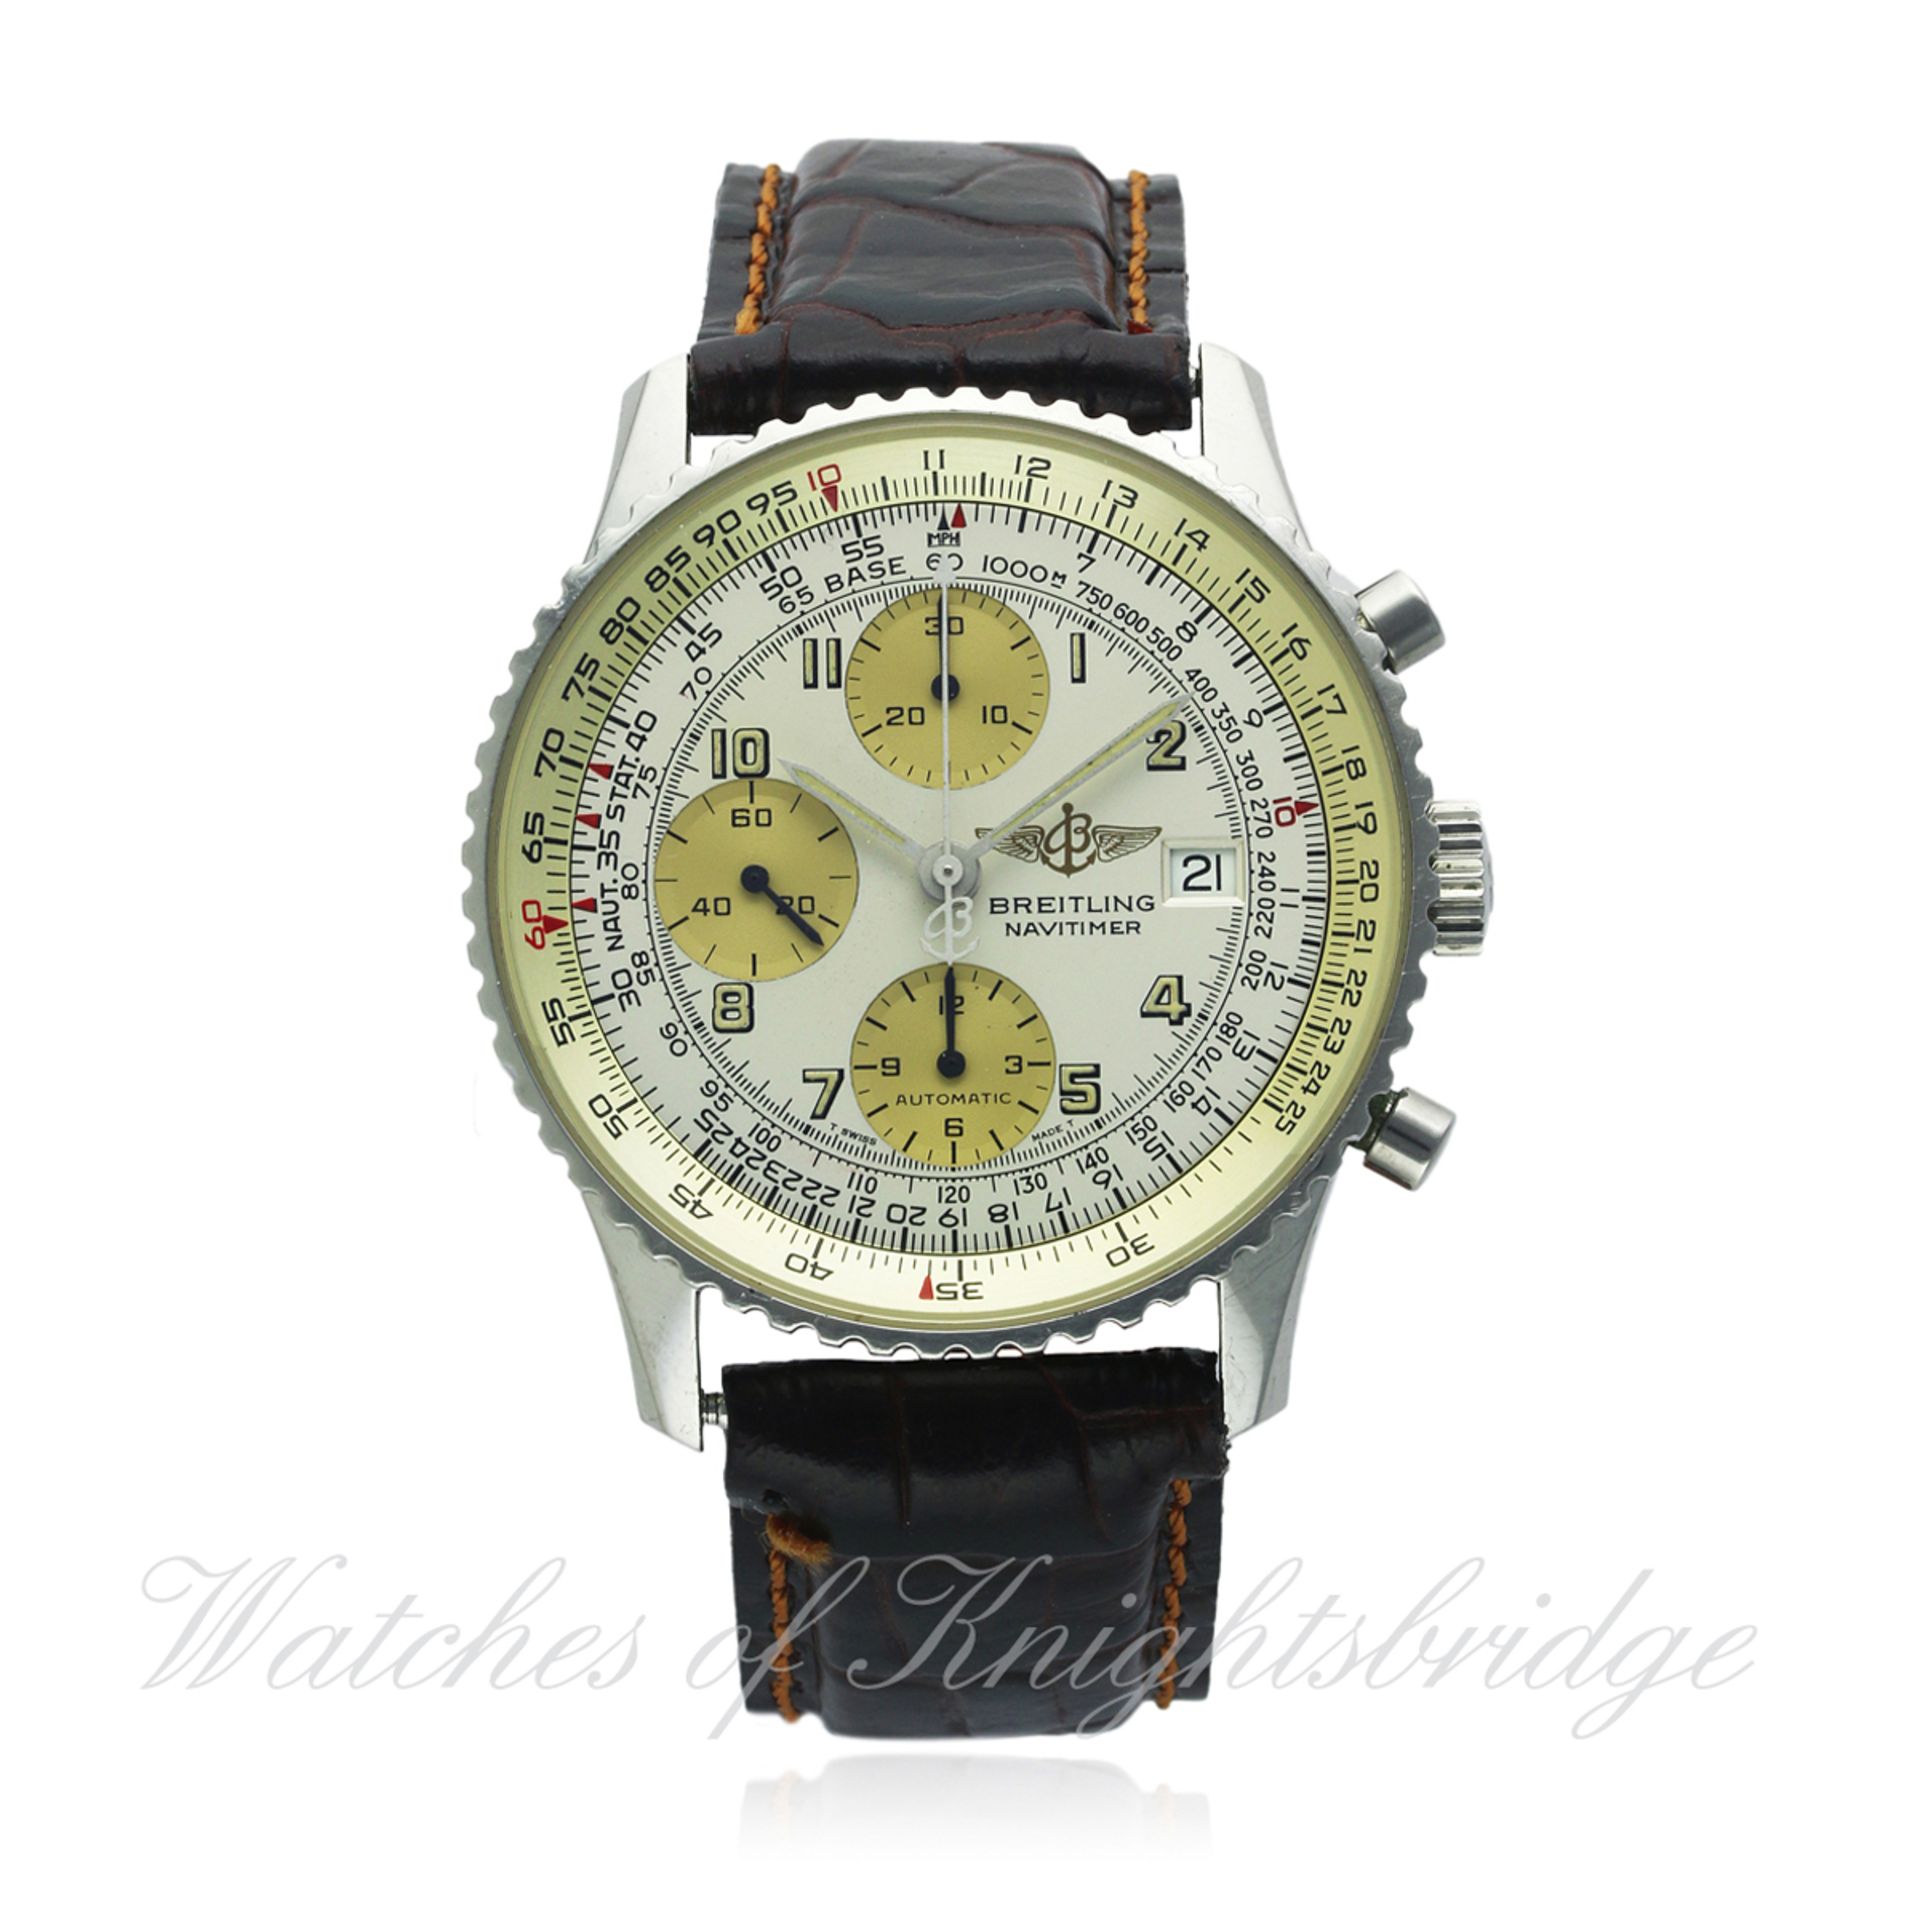 A GENTLEMAN'S STAINLESS STEEL BREITLING NAVITIMER AUTOMATIC CHRONOGRAPH WRIST WATCH CIRCA 1990s,